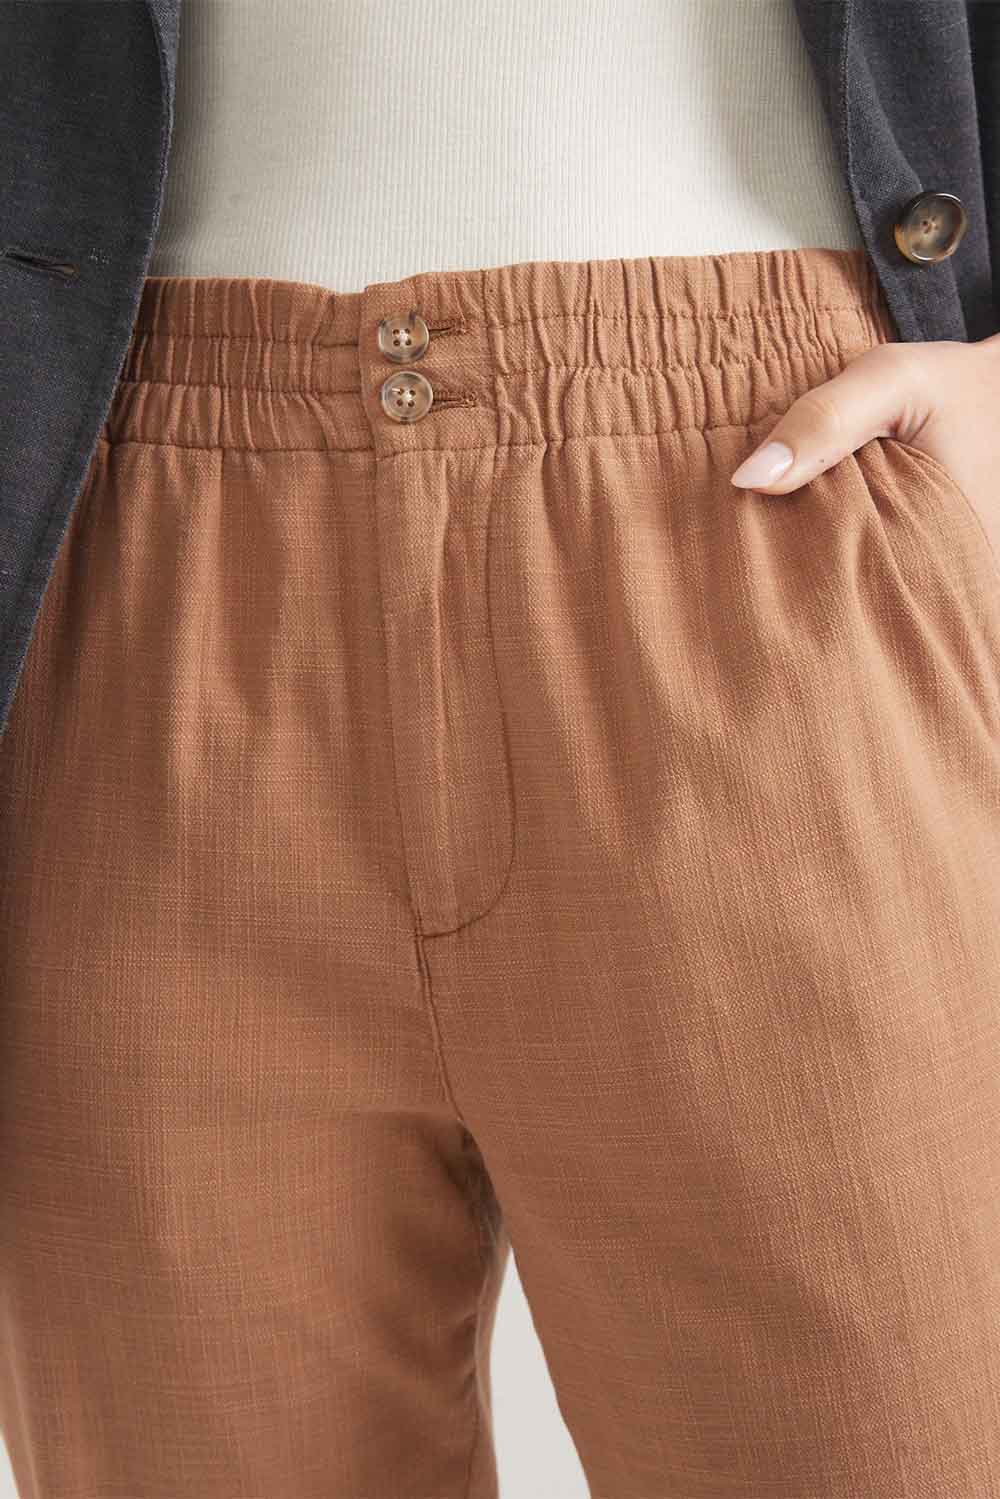 Marine Layer - Elle Pant - Toasted Coconut - Detail